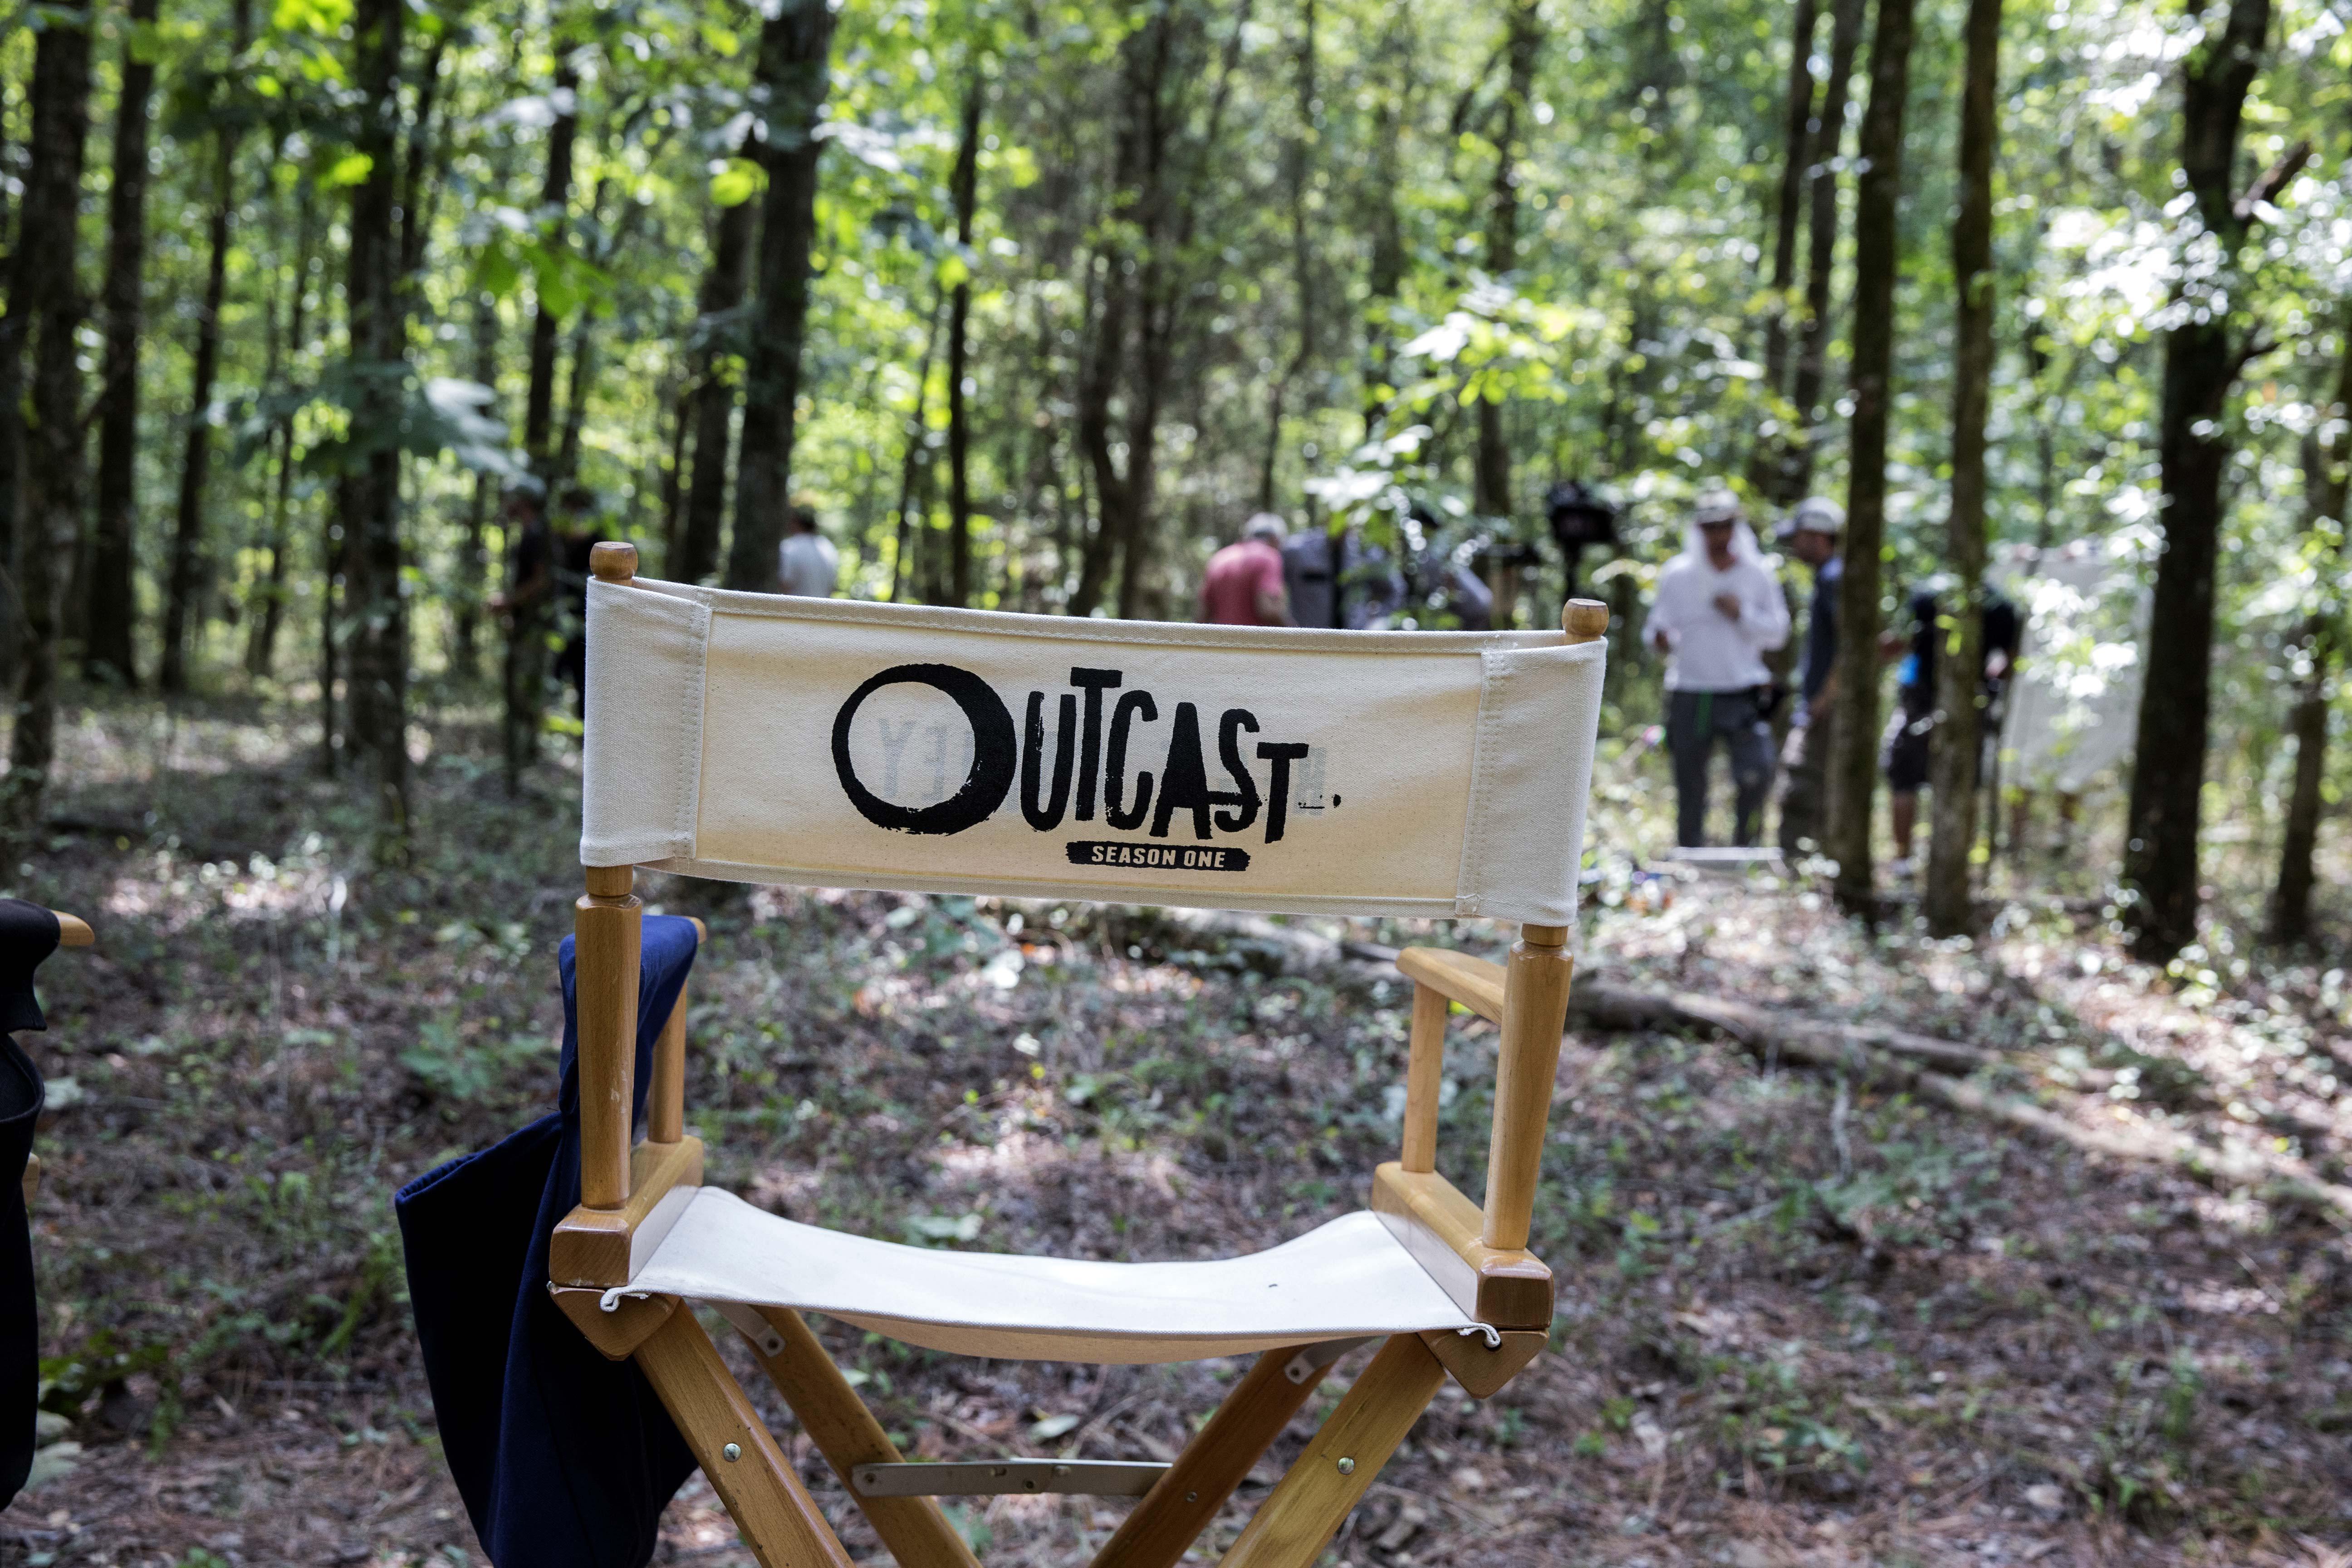 From the set of Cinemax Outcast